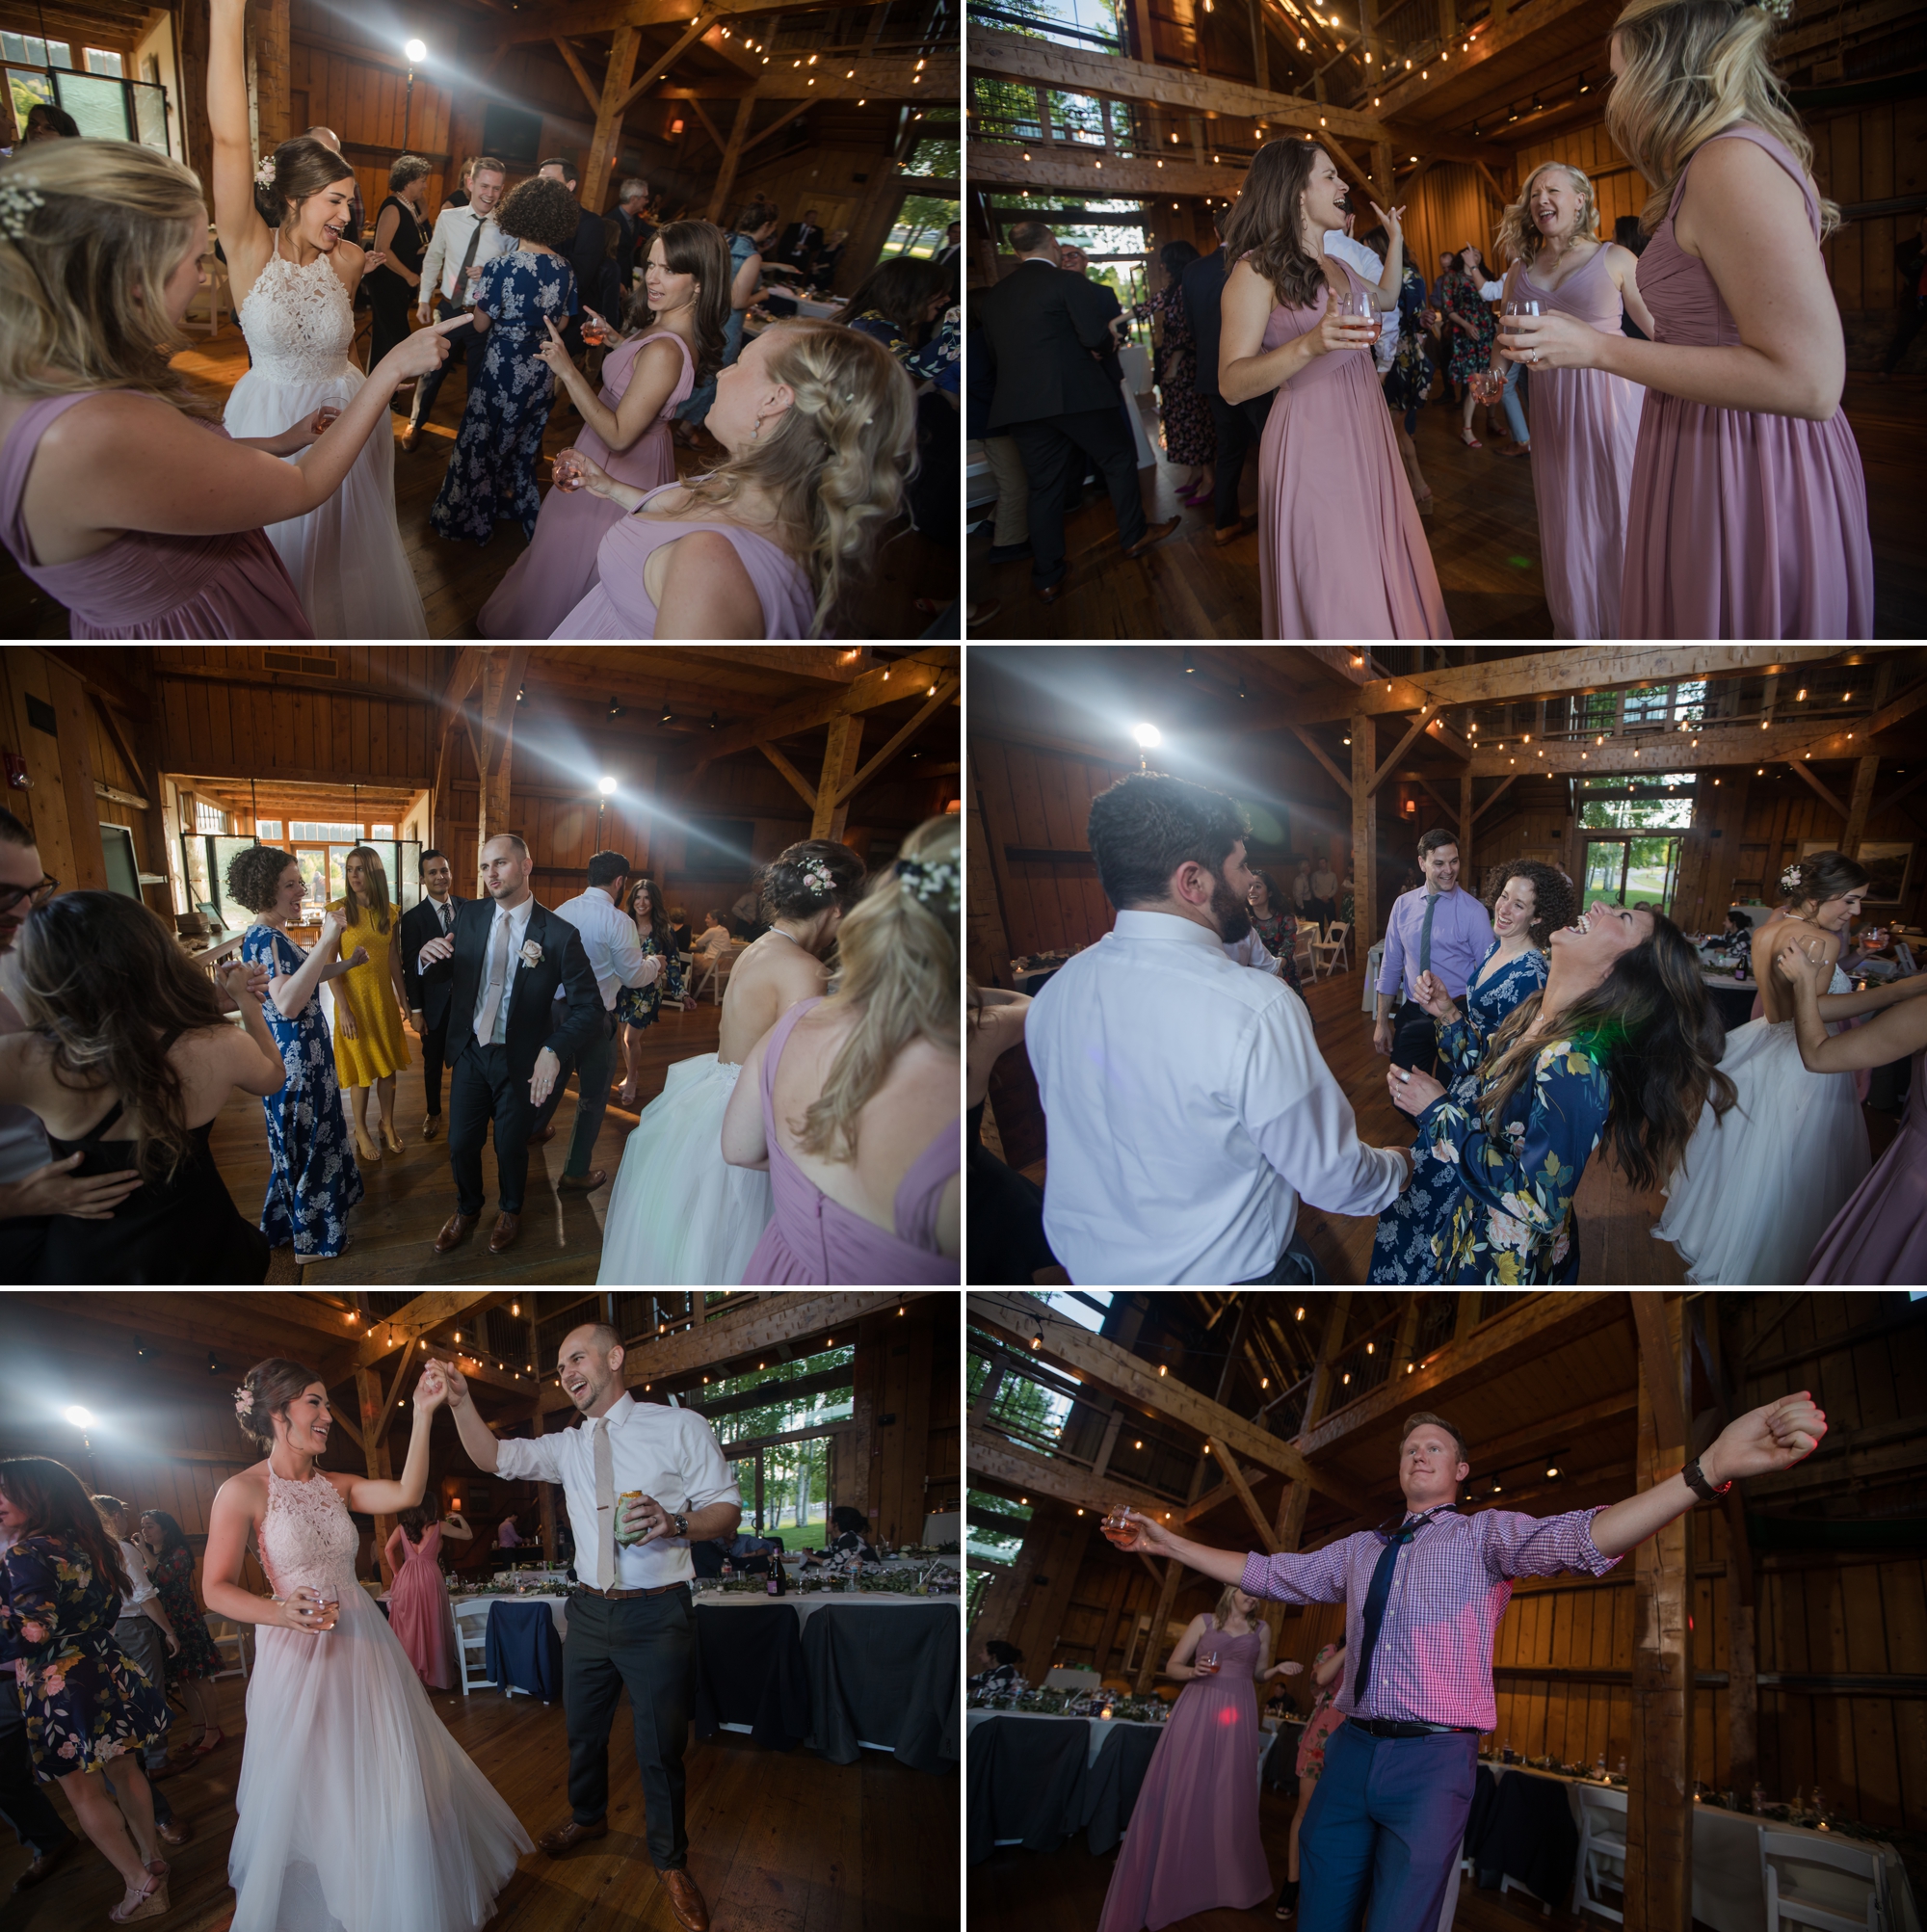 Guests having fun at Carbondale wedding reception